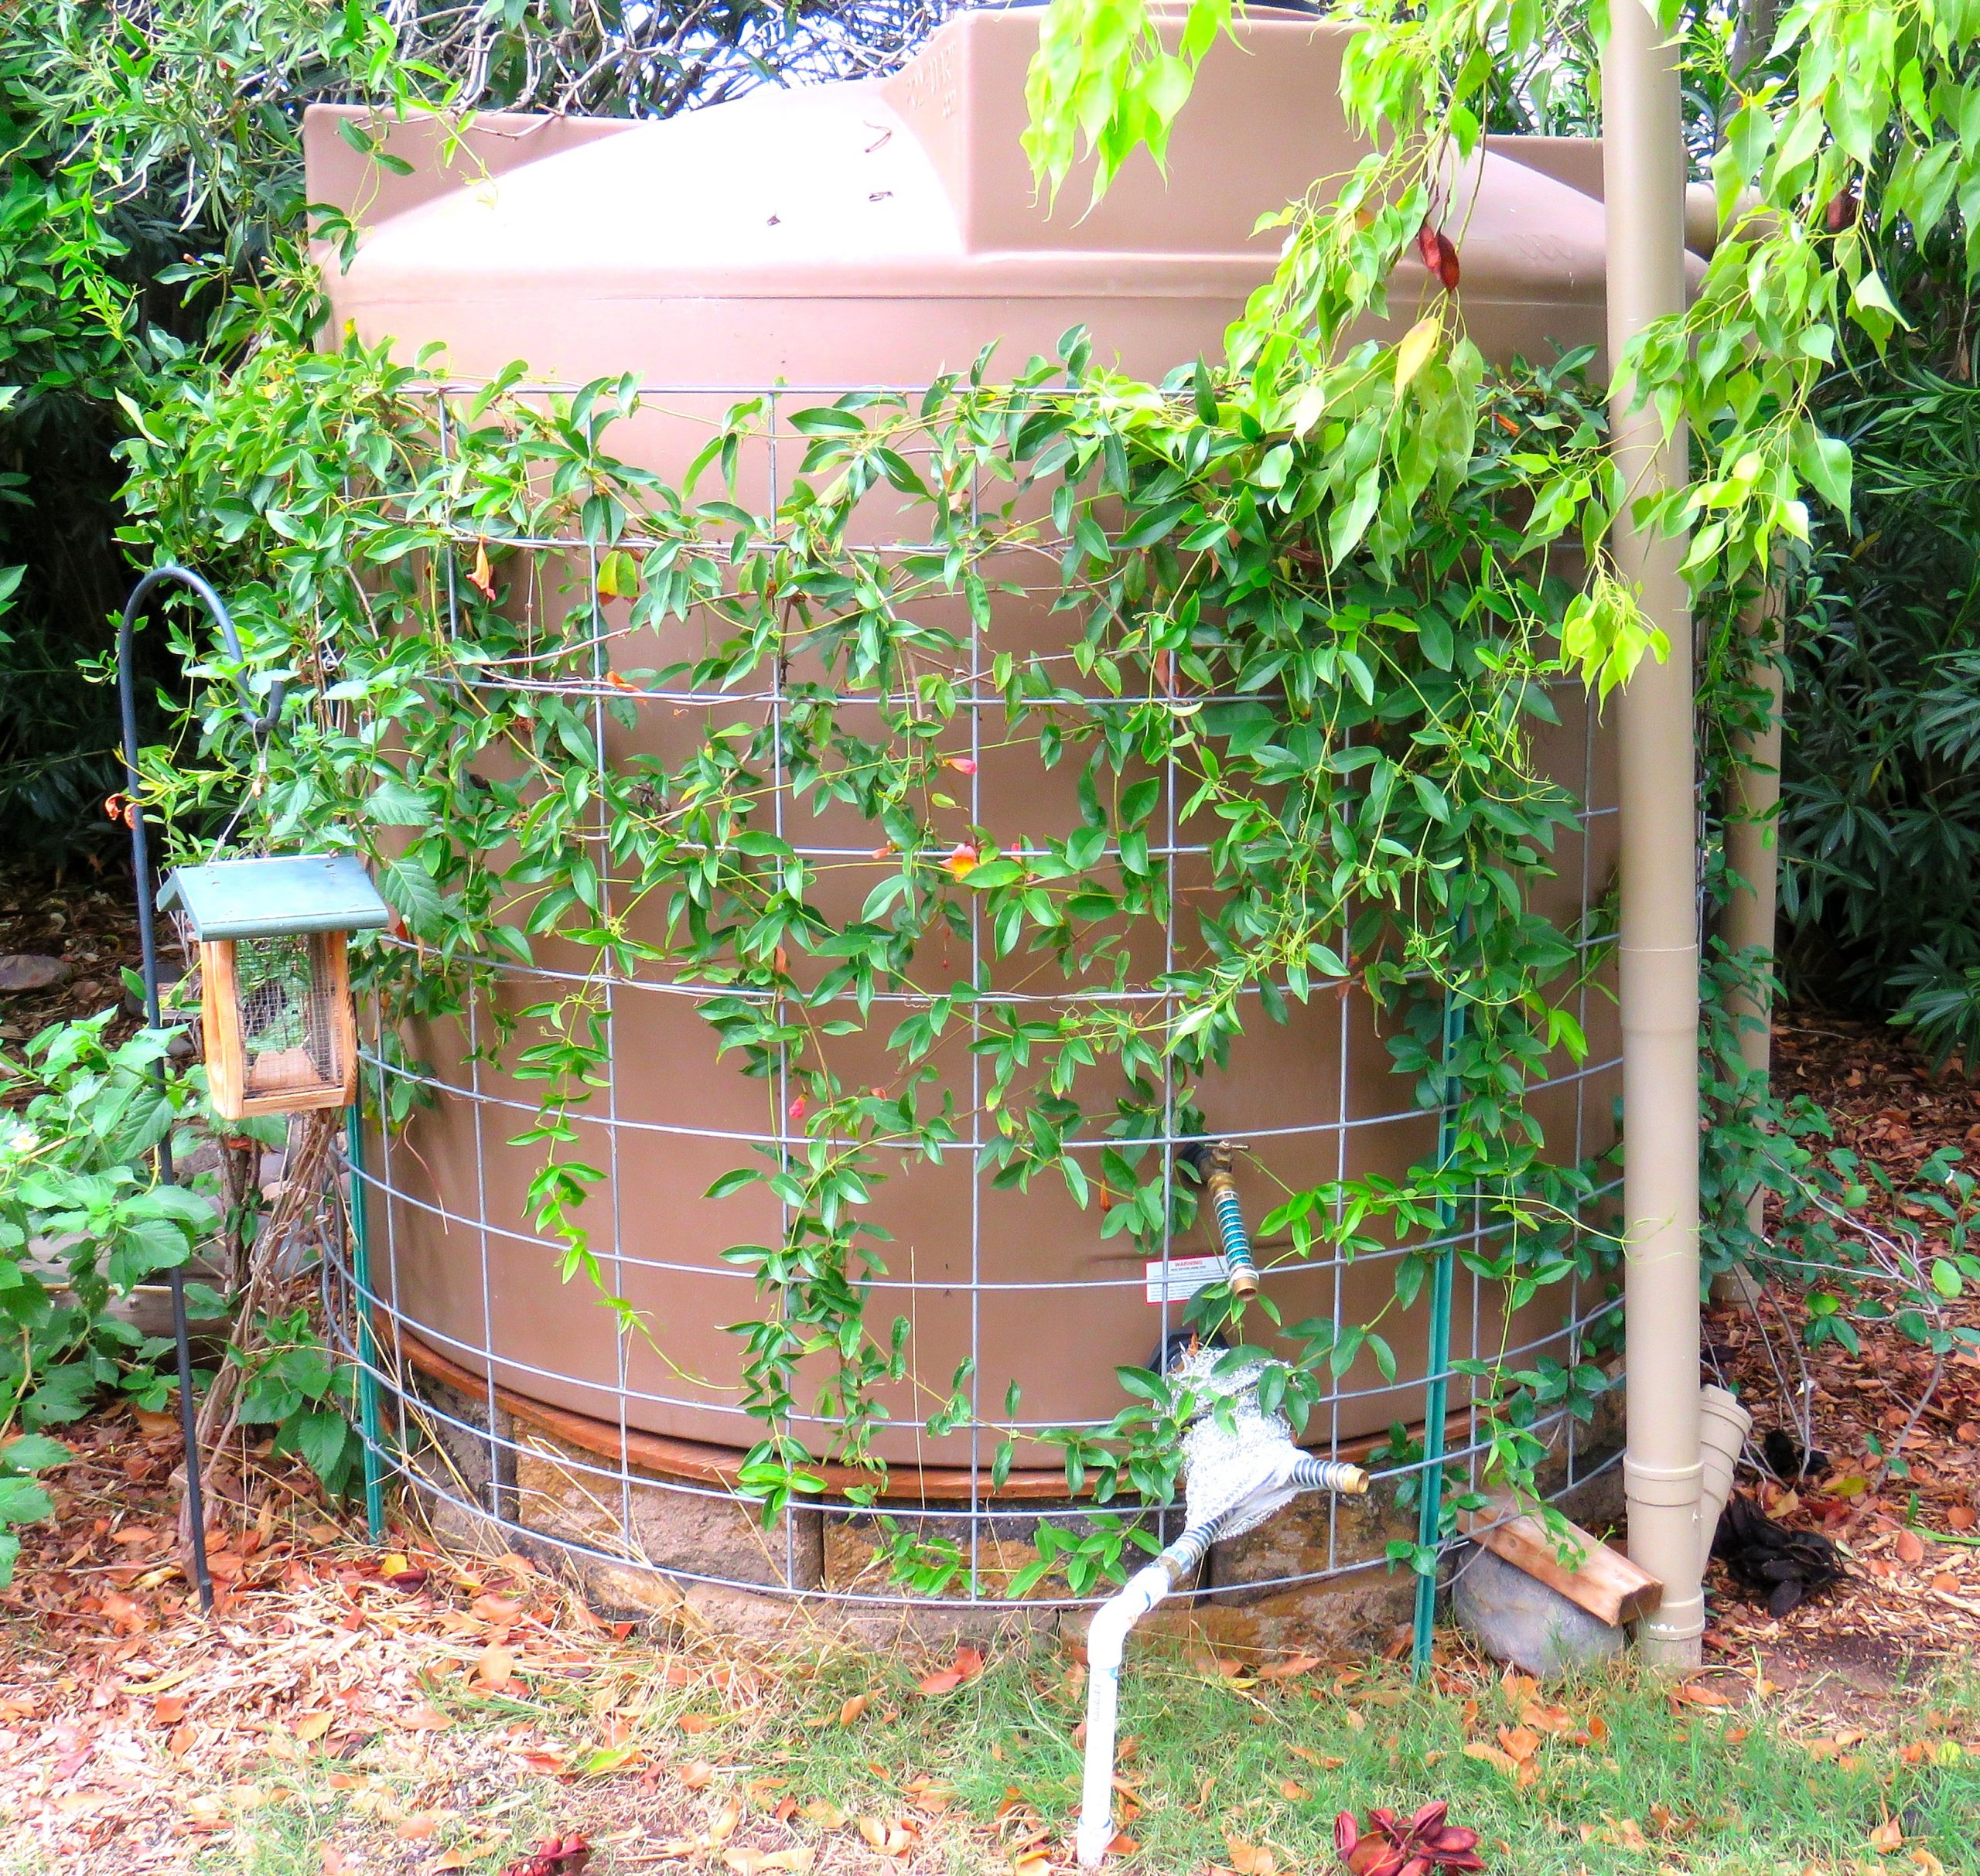 Cistern in yard with vines growing on it.